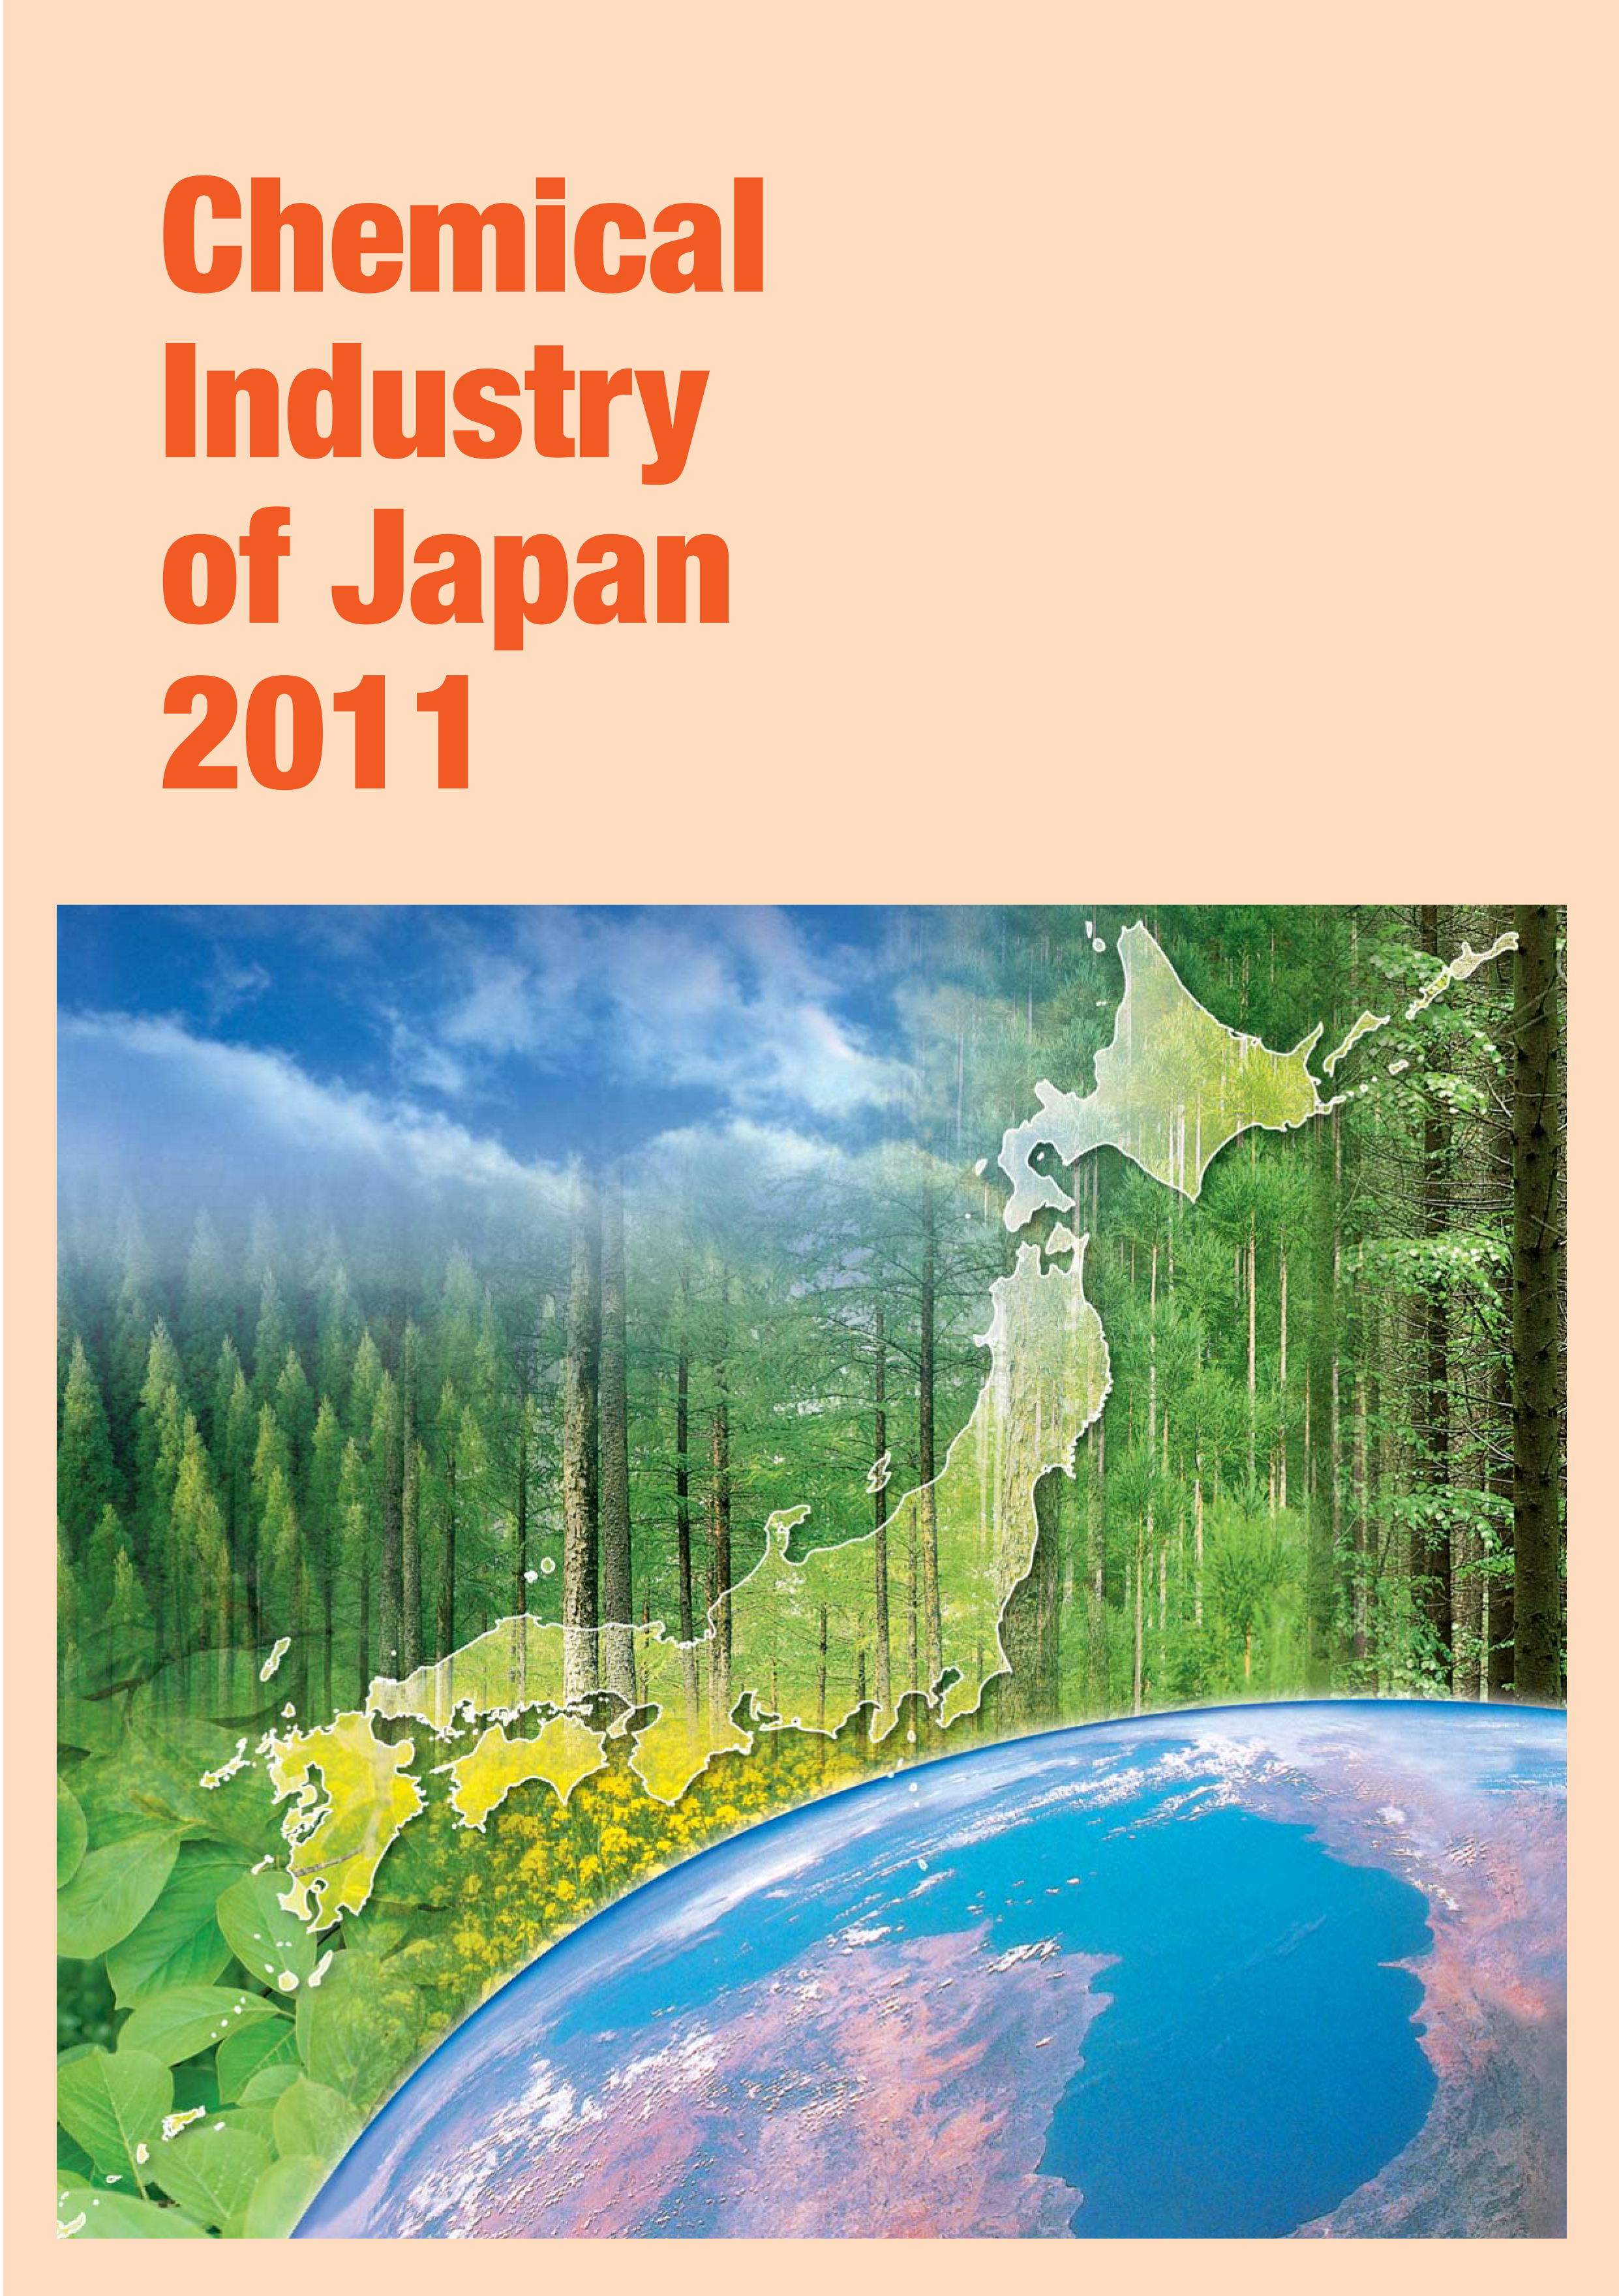 2011 CHEMICAL INDUSTRY OF JAPAN IN GRAPHS